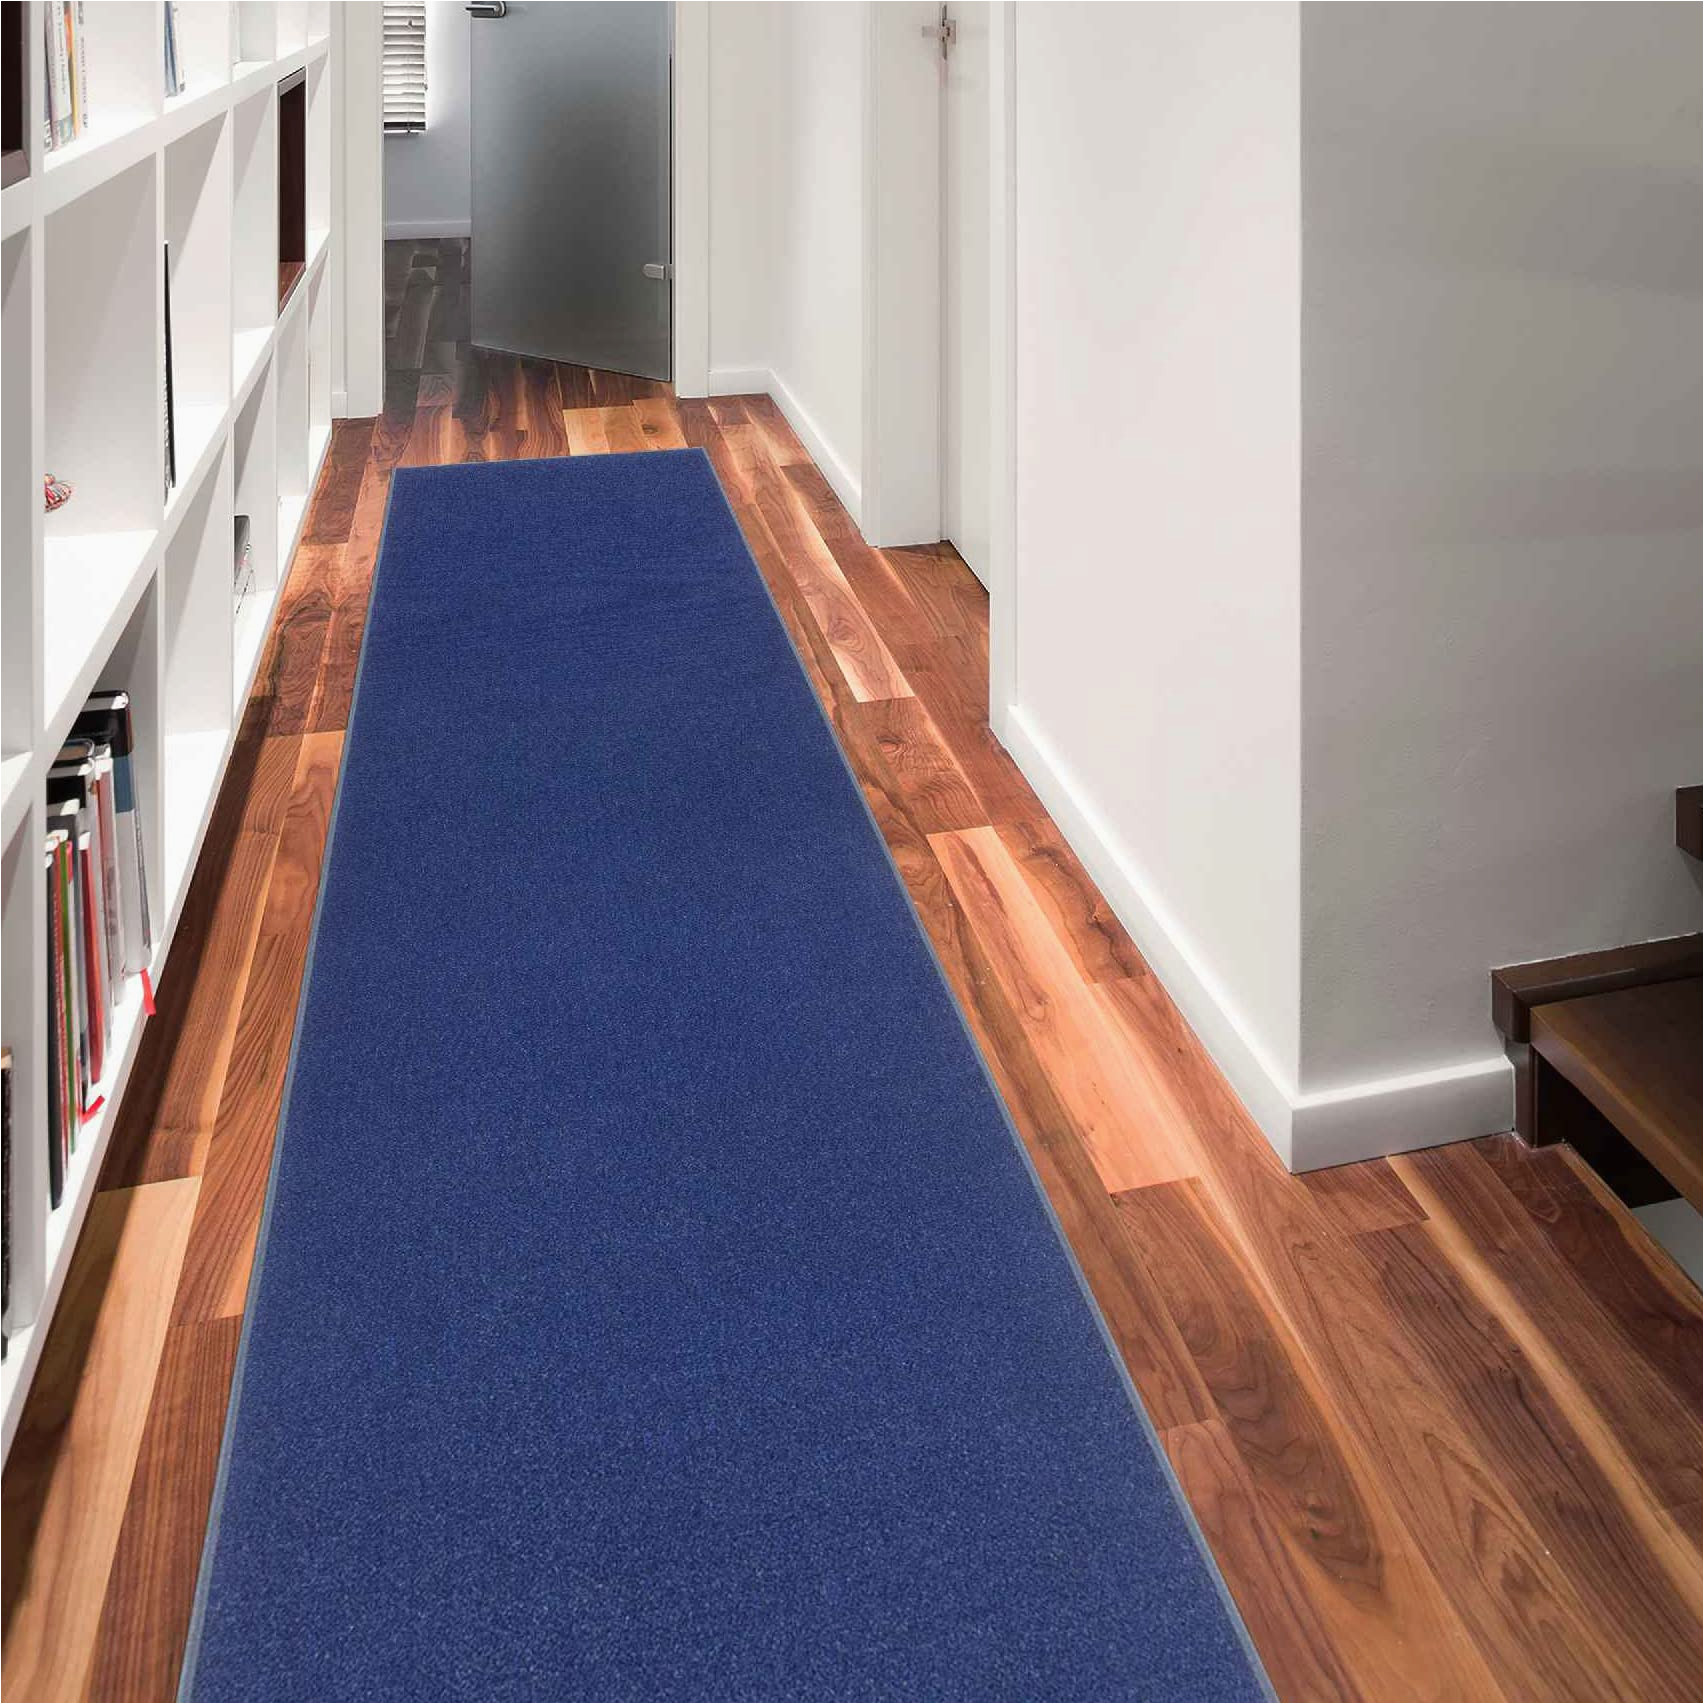 3 X 10 area Rug solid Navy Blue 3×10 Washable Runner Rug with Rubber Backing Non Slip – area Rugs for Living Room, Entryway, Kitchen, Hallway, Bedroom, Actual Size …